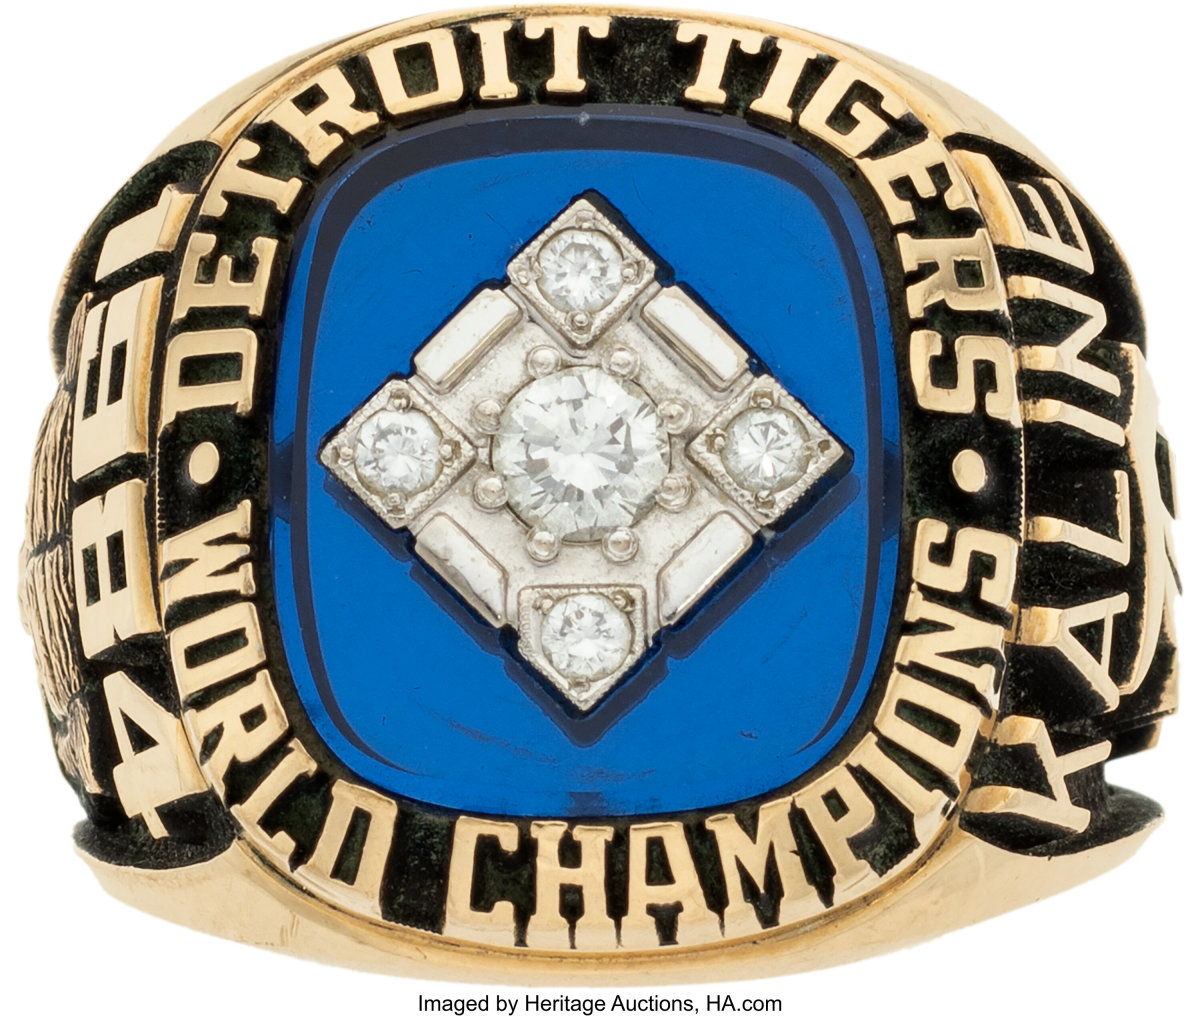 A 1984 World Series ring from the Al Kaline Collection.